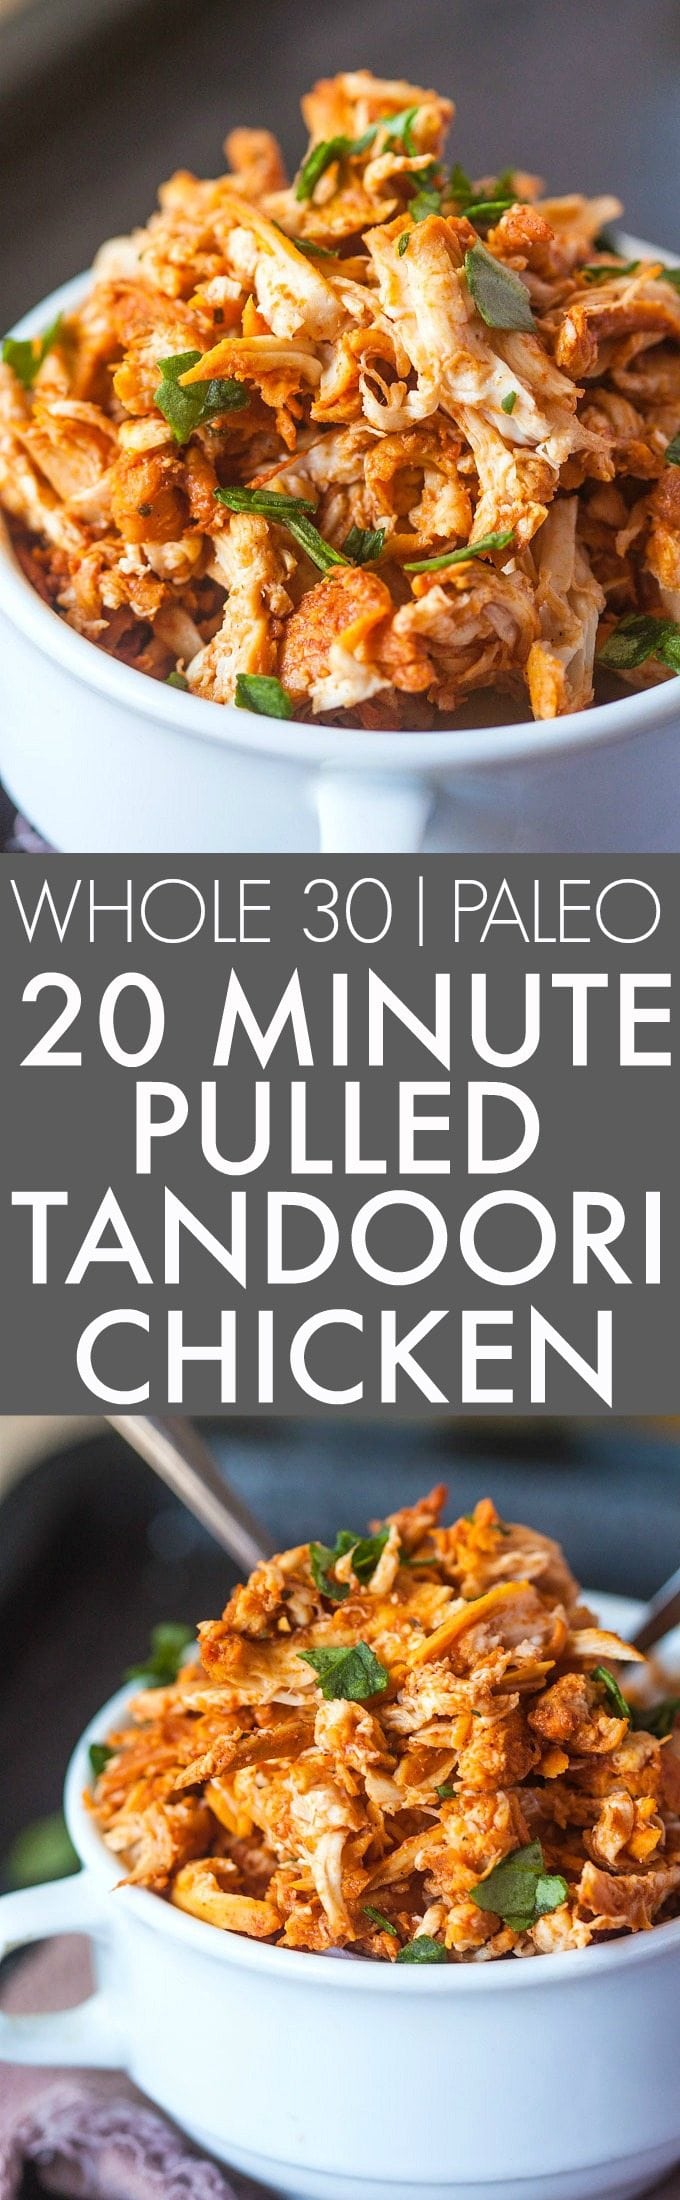 20 Minute Stovetop Pulled Tandoori Chicken (Whole 30, Paleo)- Whole30 Friendly juicy, moist and EASY pulled tandoori chicken perfect for a low carb, high protein and flavorful meal- Lunch, dinner and freezer friendly! {paleo, gluten free, whole30}- thebigmansworld.com